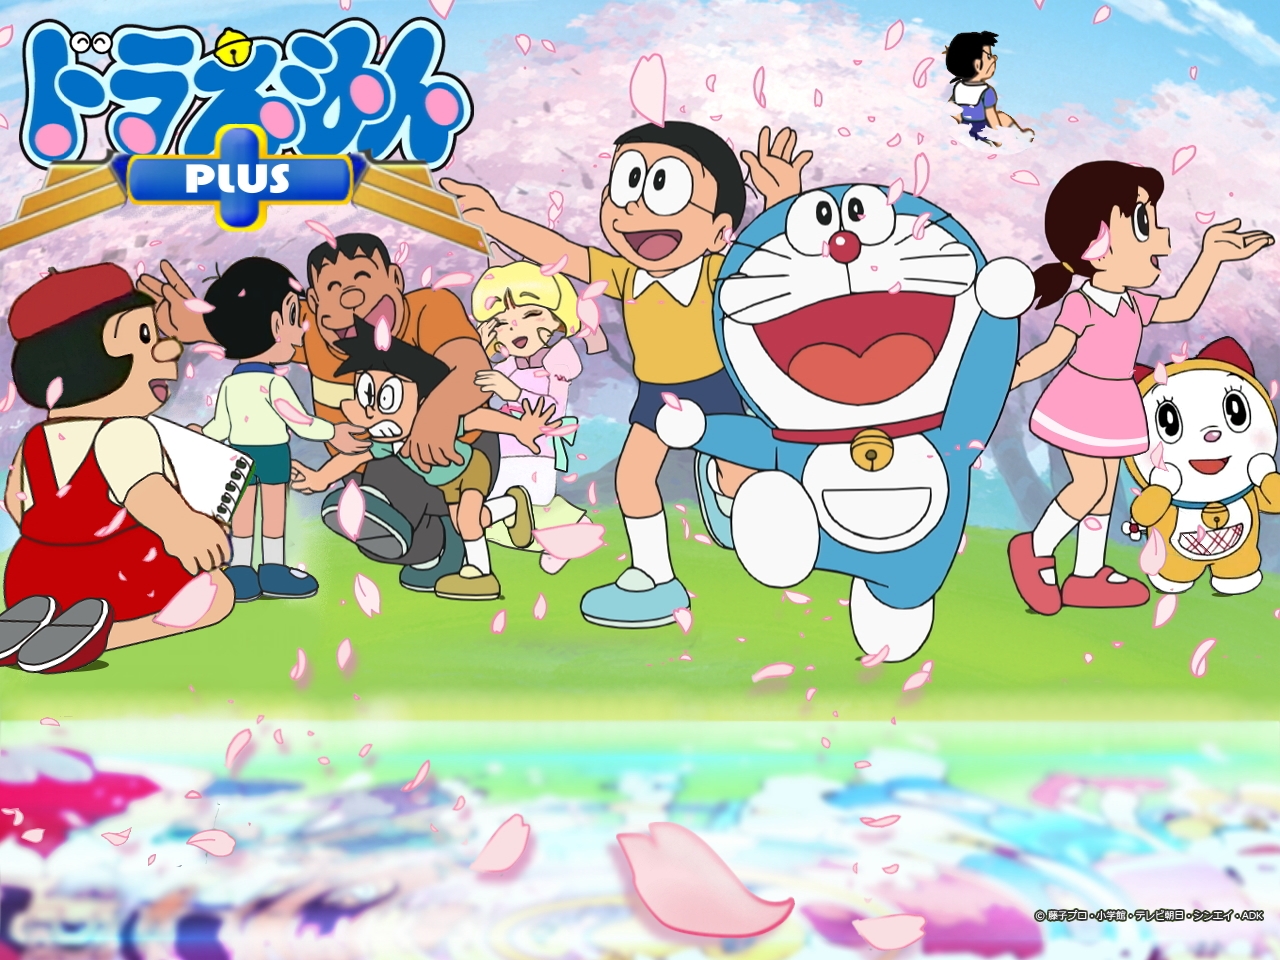 Anime Doraemon Picture - Image Abyss